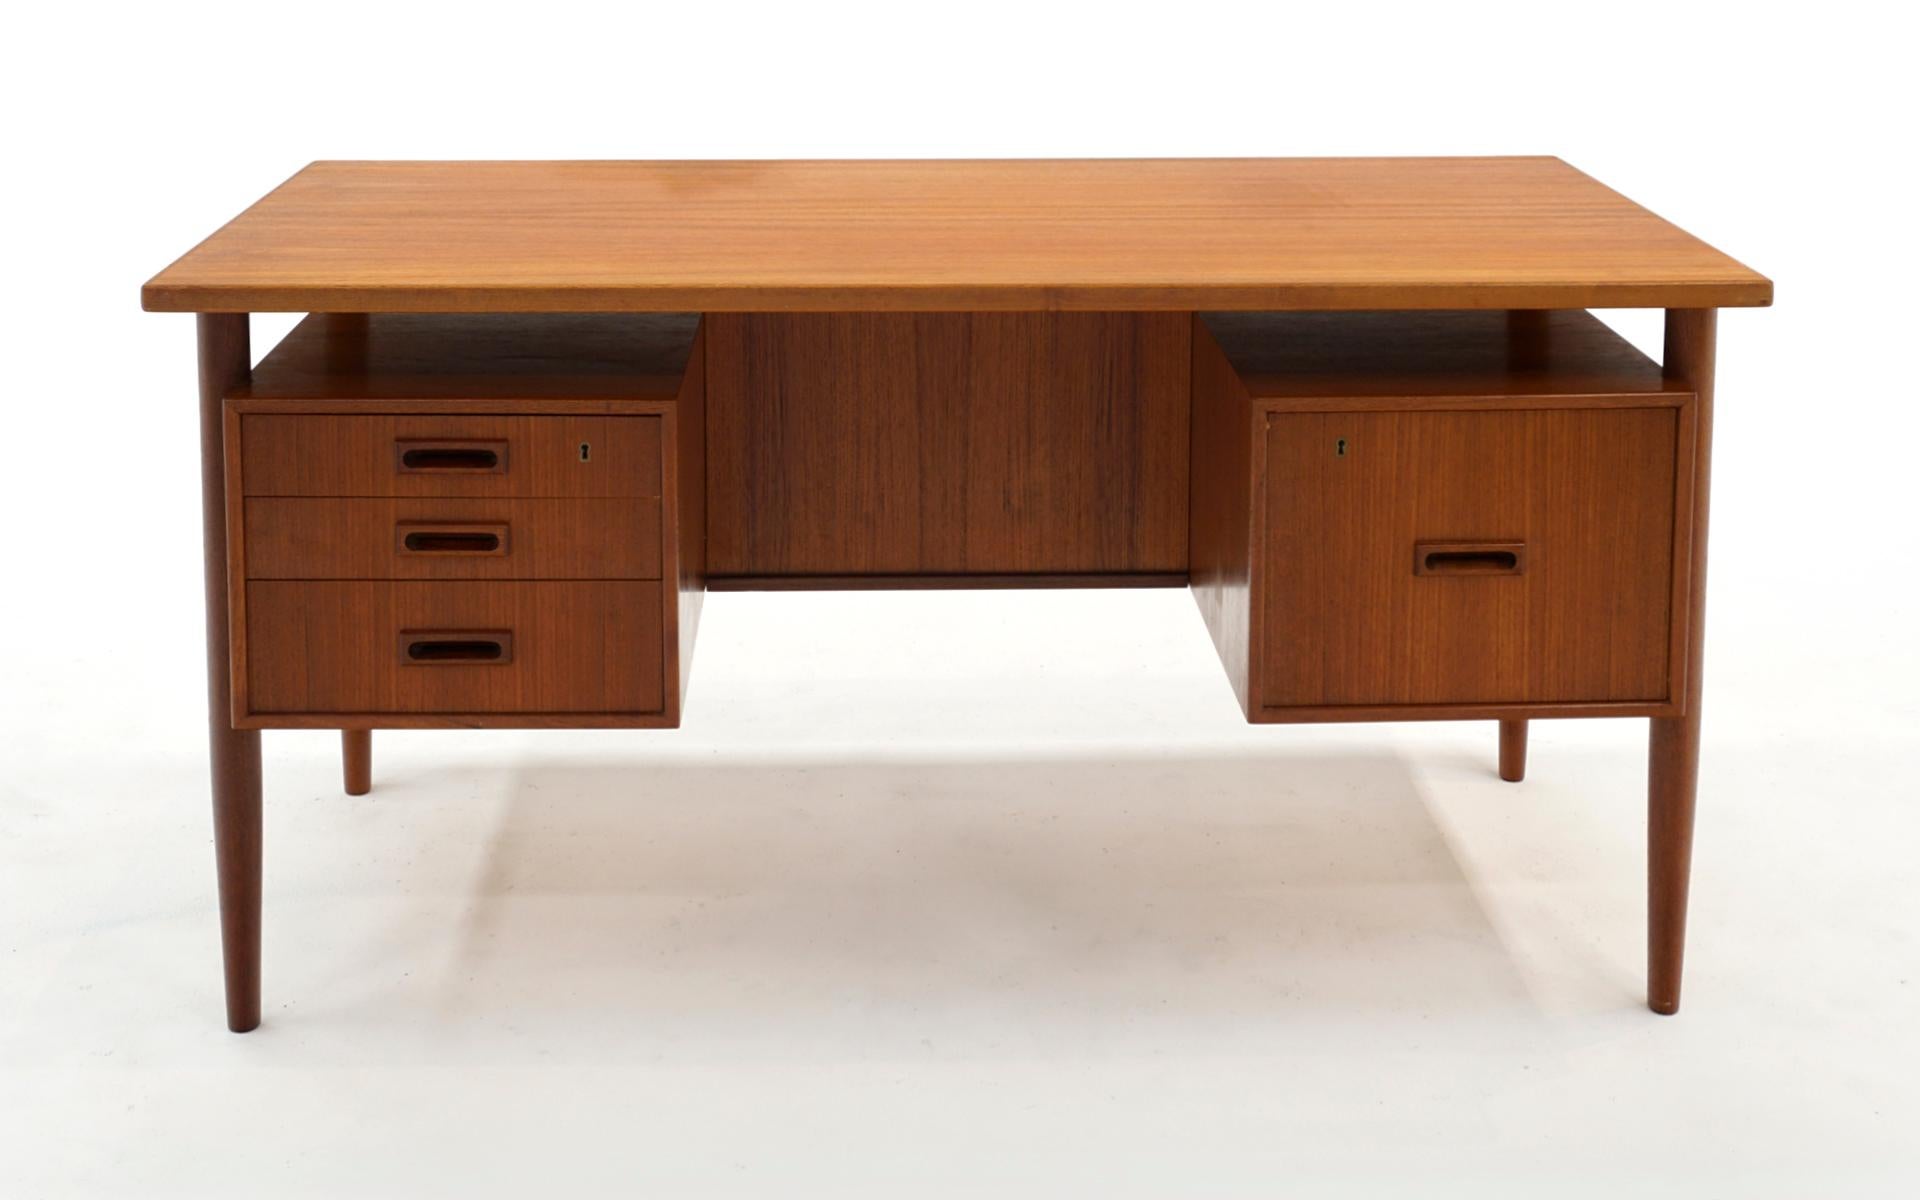 Mid-Century Danish Modern teak desk with a floating top and bookcase front. Three drawers on the left and one large file drawer on the right. This was acquired from the original owner who purchased it in the 1960s when living in Europe. It is in